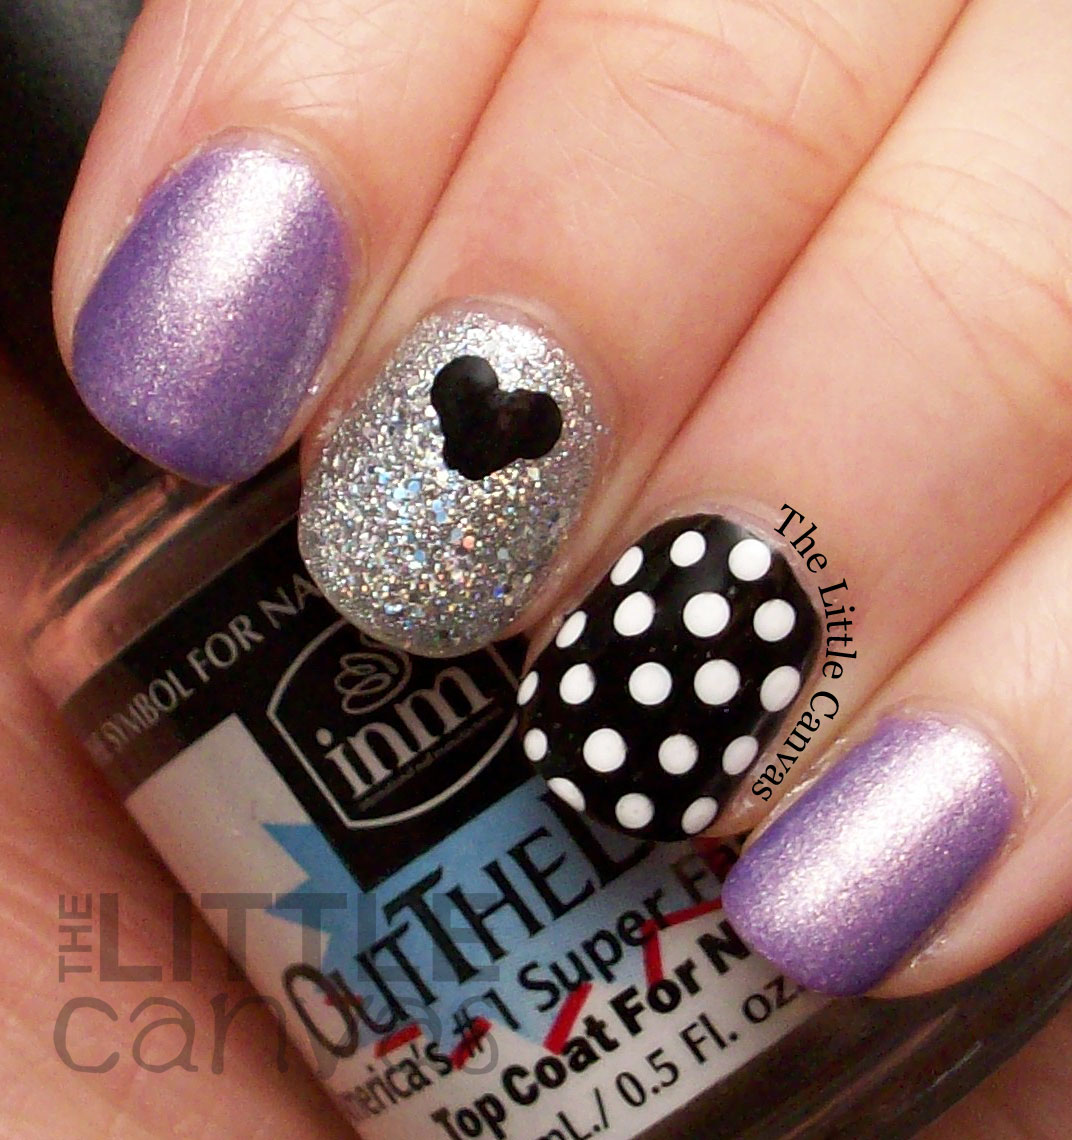 Just a Polka Dot Accent :) - The Little Canvas